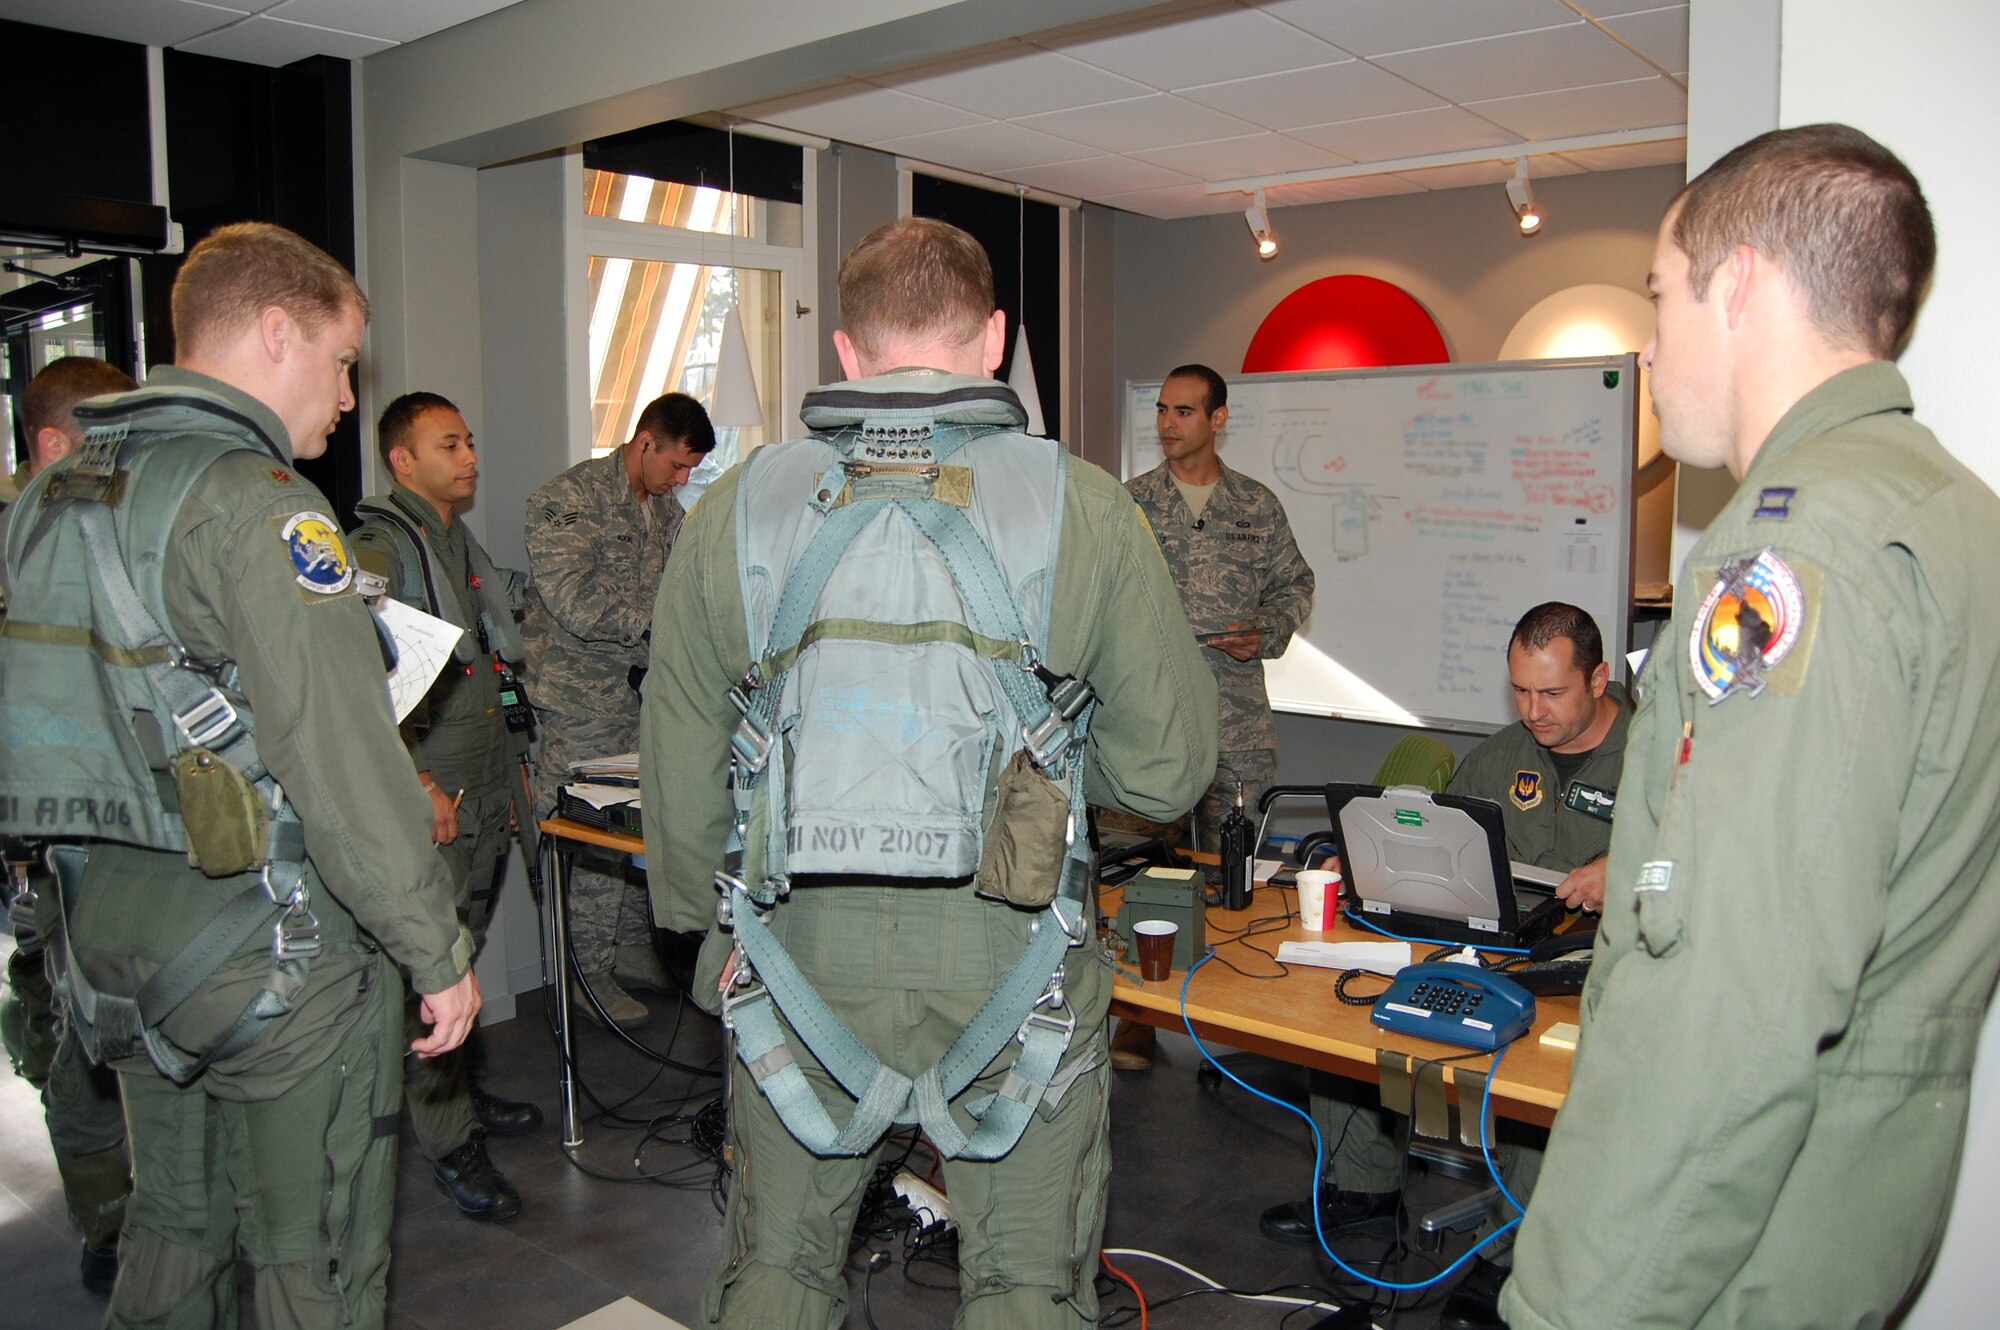 Pilots of the 555th Fighter Squadron receive a pre mission brief before heading out to the flightline Aug. 6, 2010 at Kallax Air Base, Sweden. The 555th FS and 31st Aircraft Maintenance Squadron conducted more than 180 air-to-air and air-to-ground missions during a two week exercise at the air base in which they worked alongside the Swedish air force's Norrbotten Wing. (U.S. Air Force photo illustration by Tech. Sgt. Lindsey Maurice/Released)